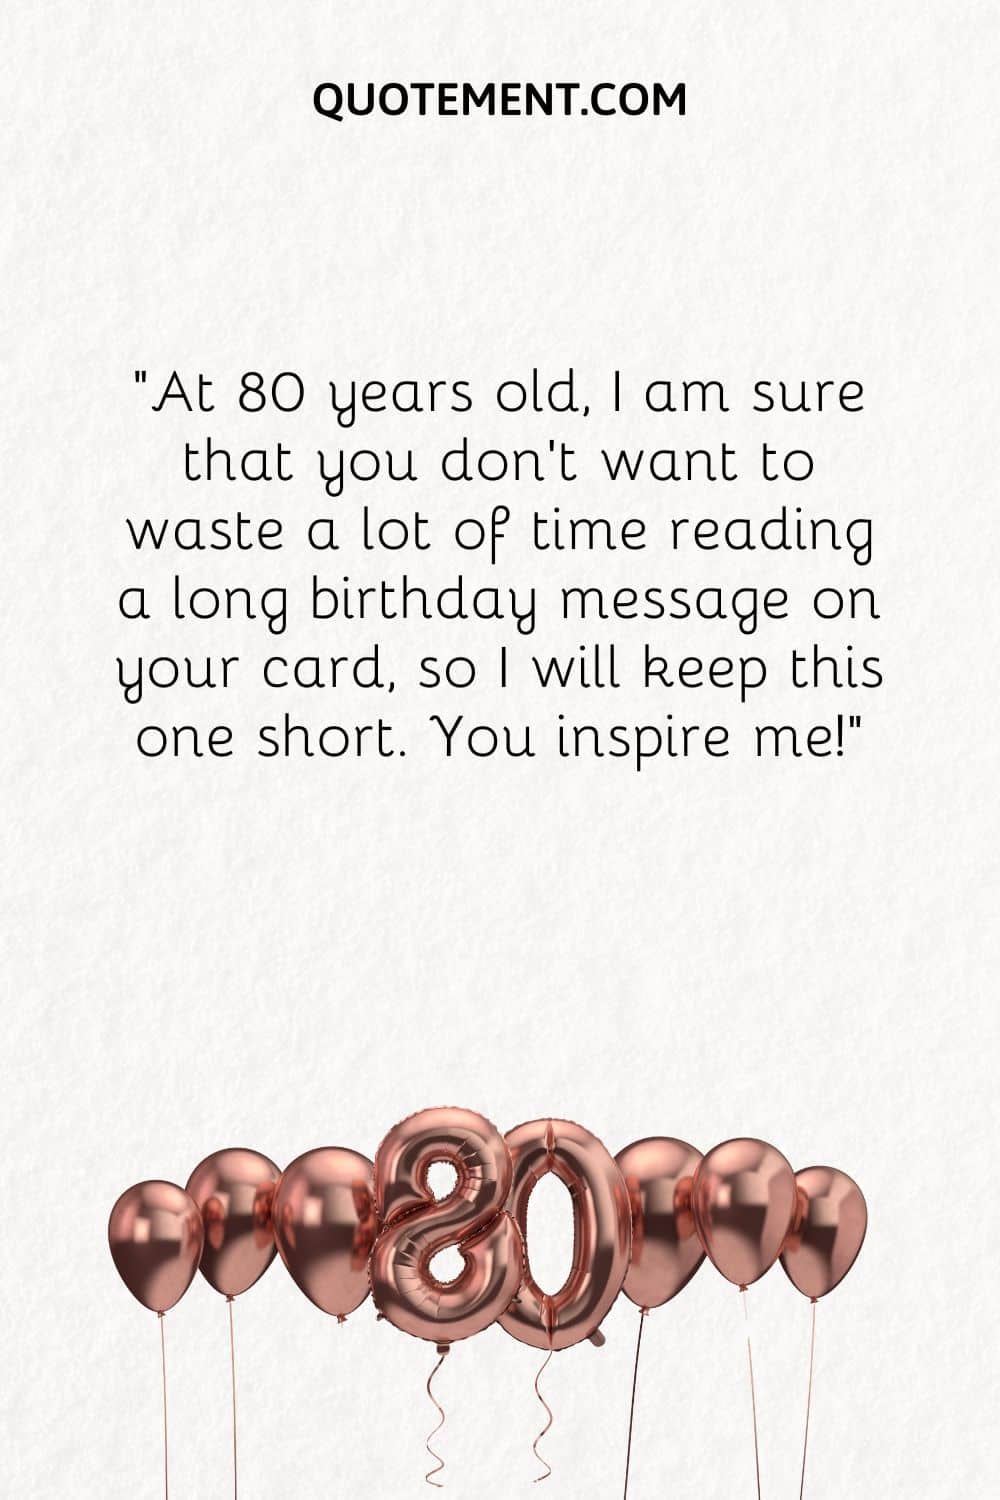 At 80 years old, I am sure that you don’t want to waste a lot of time reading a long birthday message on your card, so I will keep this one short